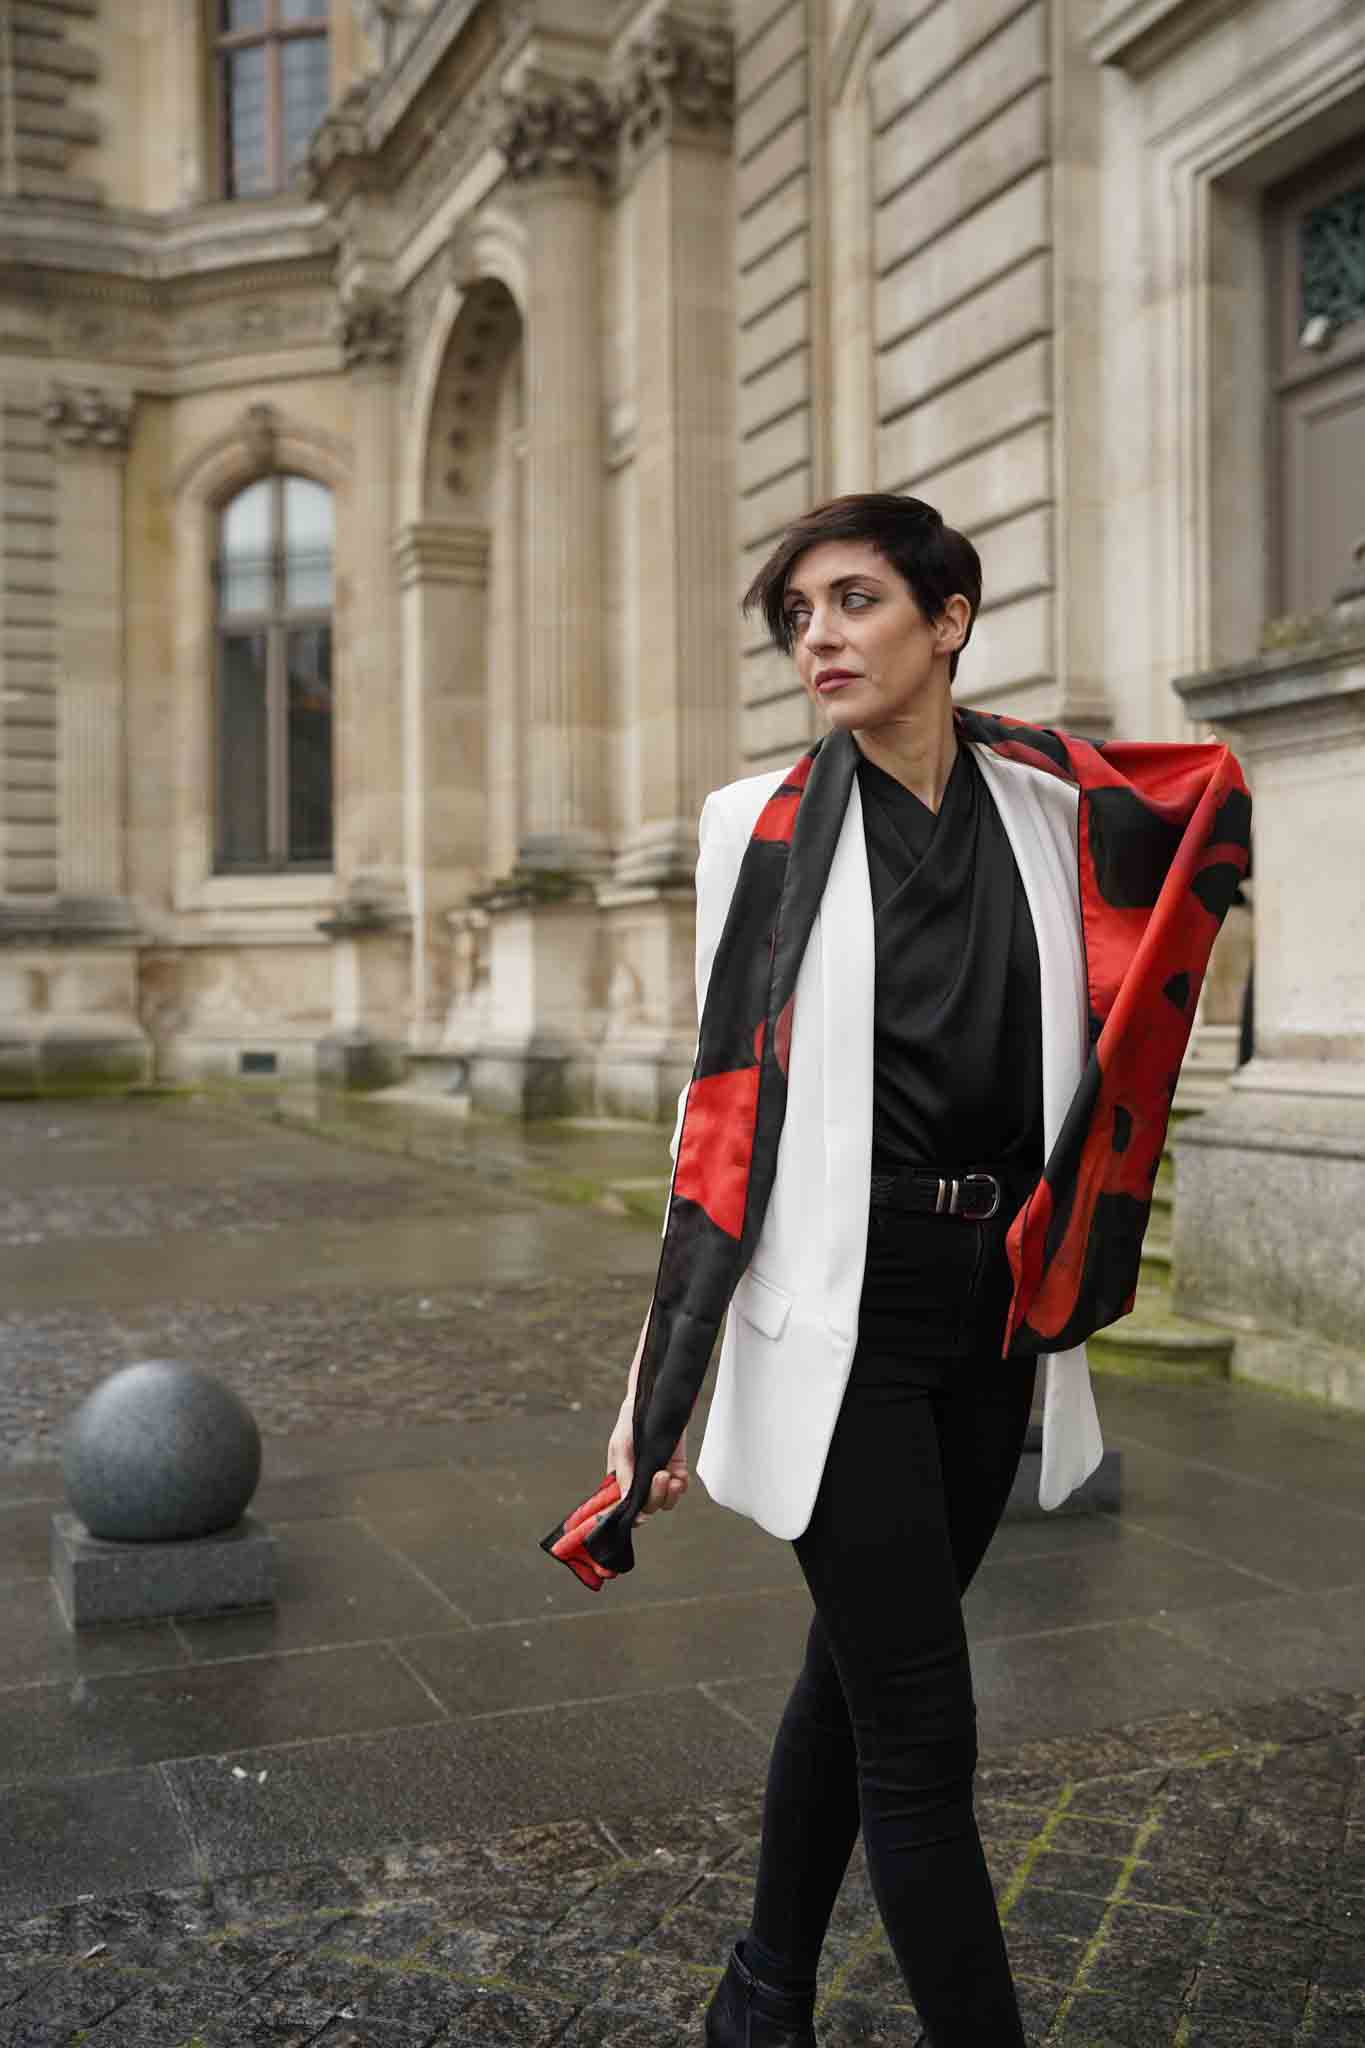 Vincero Art as Scarf in Paris – from the Opera Line by Claudia Palmira